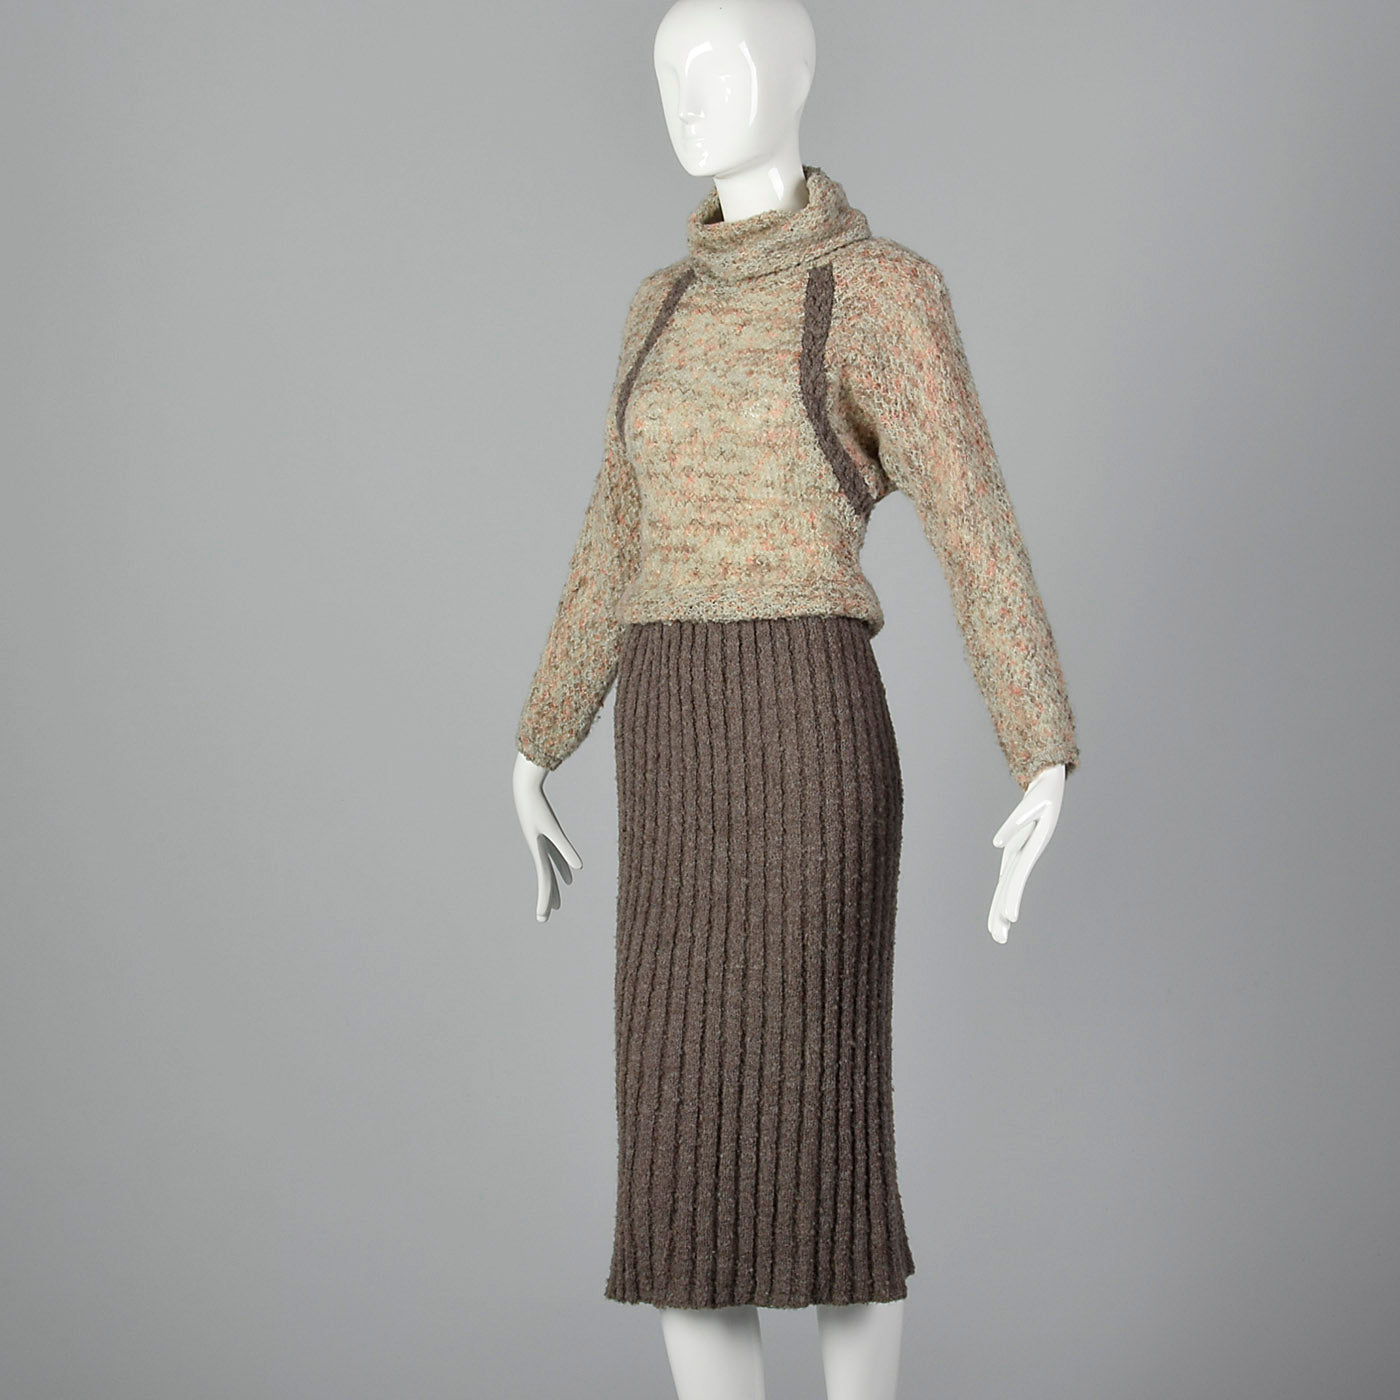 1970s Knit Dress with Cowl Neck